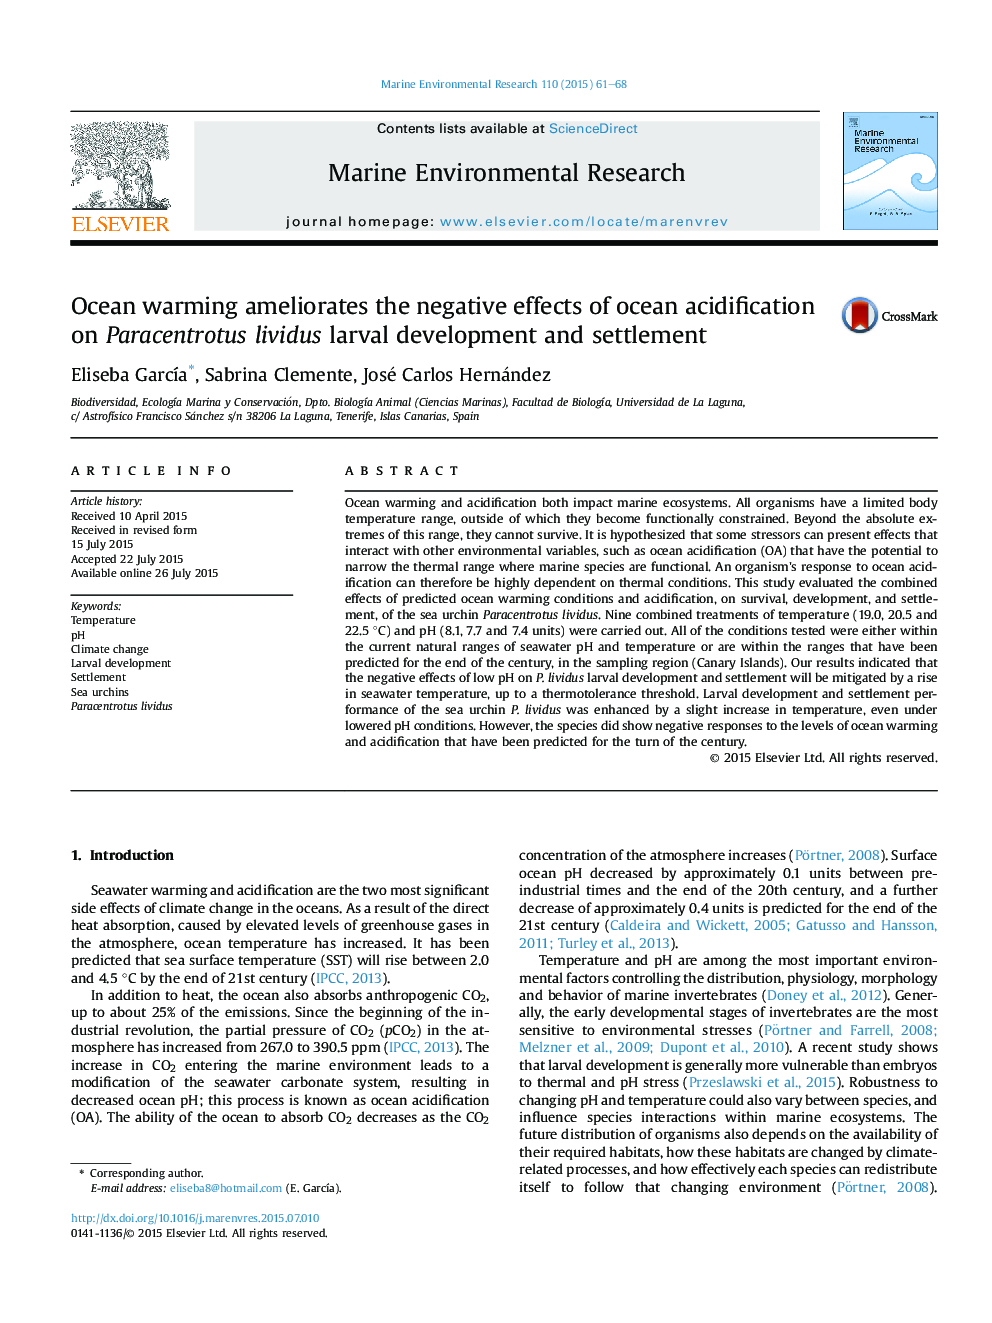 Ocean warming ameliorates the negative effects of ocean acidification on Paracentrotus lividus larval development and settlement